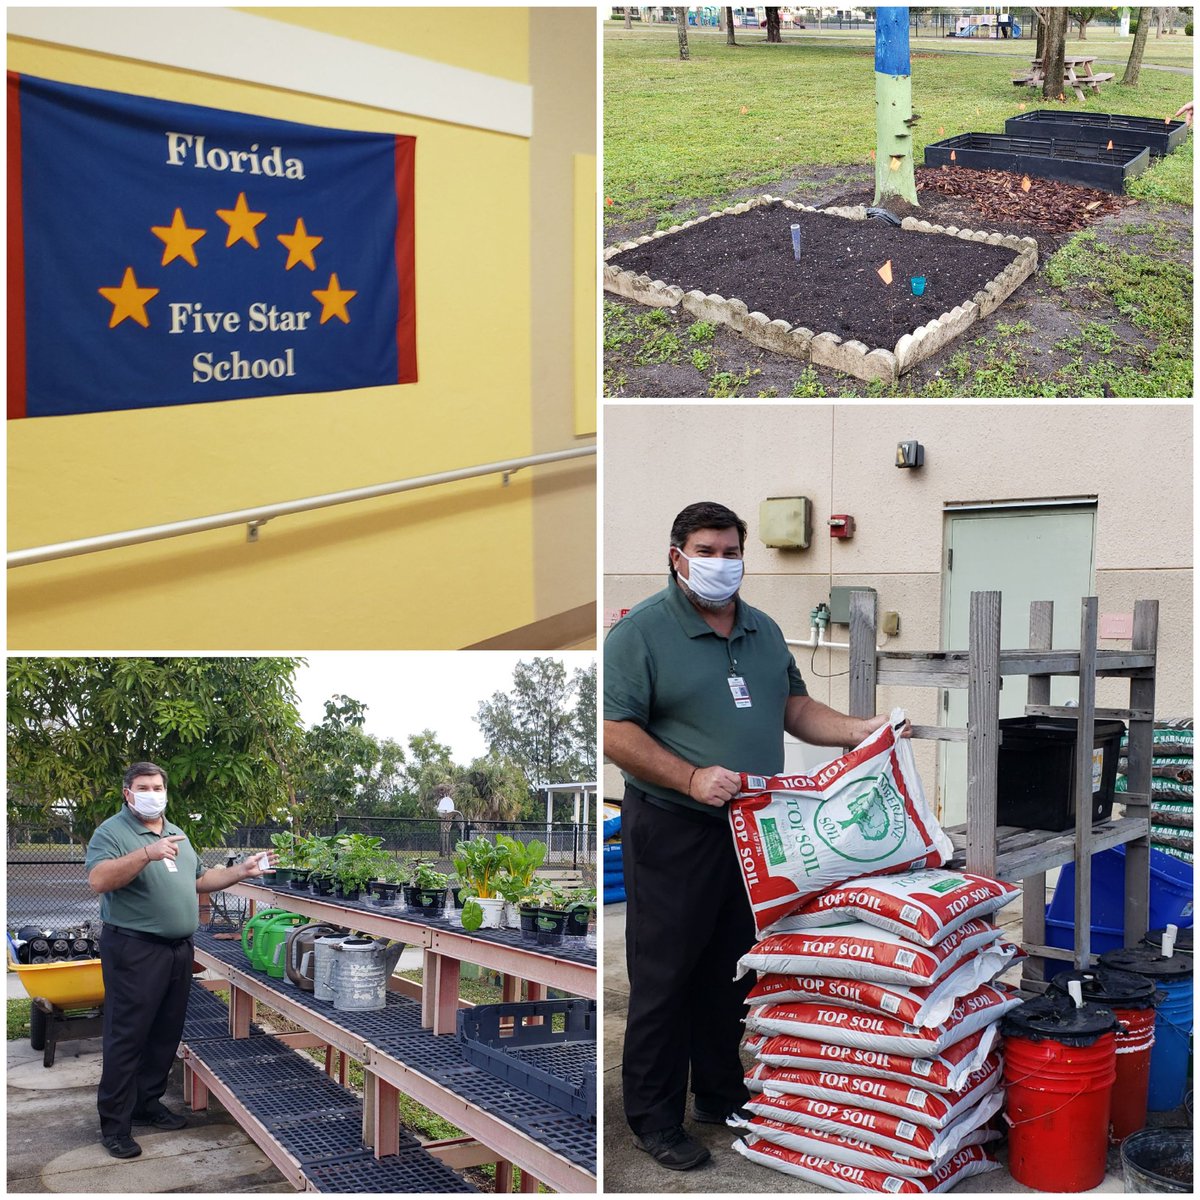 SAC meeting with @Dr_Corcoran. Visit w new AG teacher, Mr Miller, to see recent Lantana Home Depot donation of mulch, soil, and raised garden bed materials. #HelpingKidsLearn #DoingTheRightThing #RoyalPalmSchool #businesspartner #community #GetInvolved #THD6316 #District154